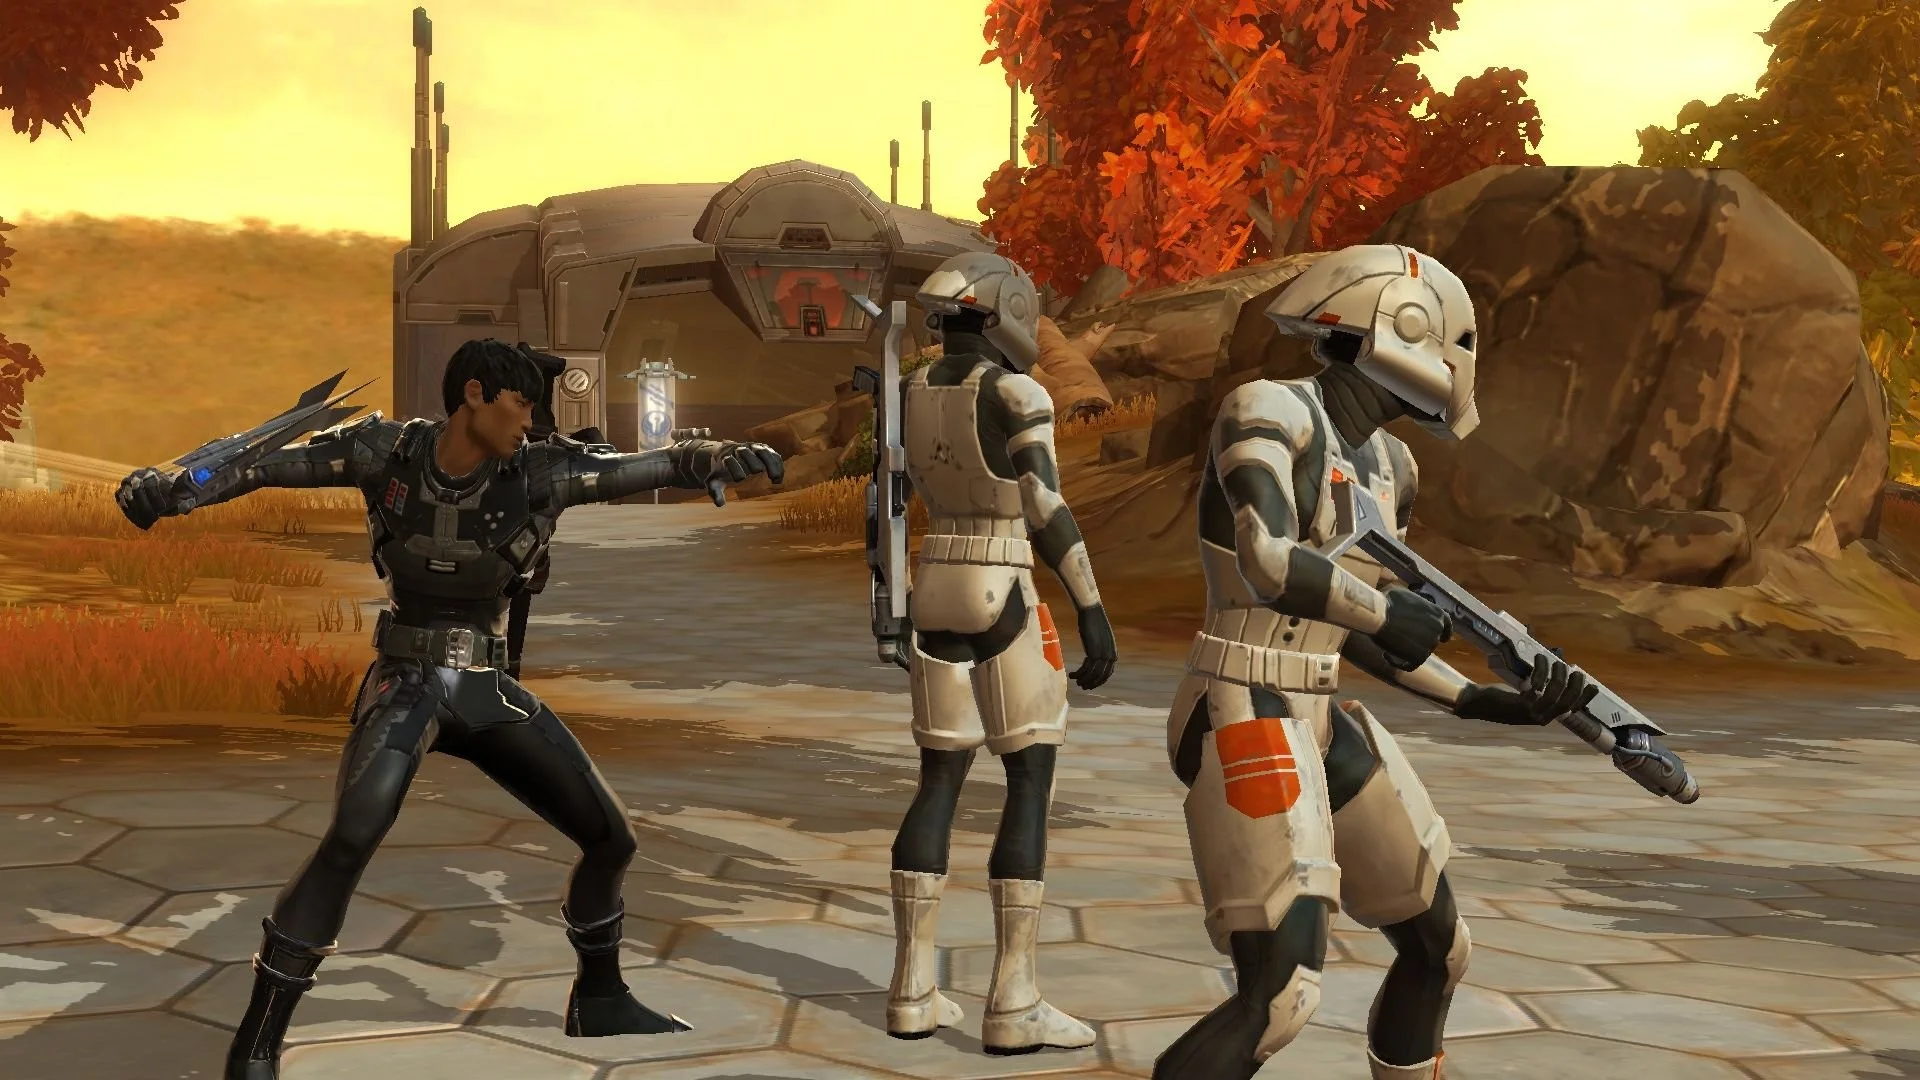 STAR WARS OLD REPUBLIC mmo rpg swtor fighting sci-fi wallpaper |  | 518922 | WallpaperUP